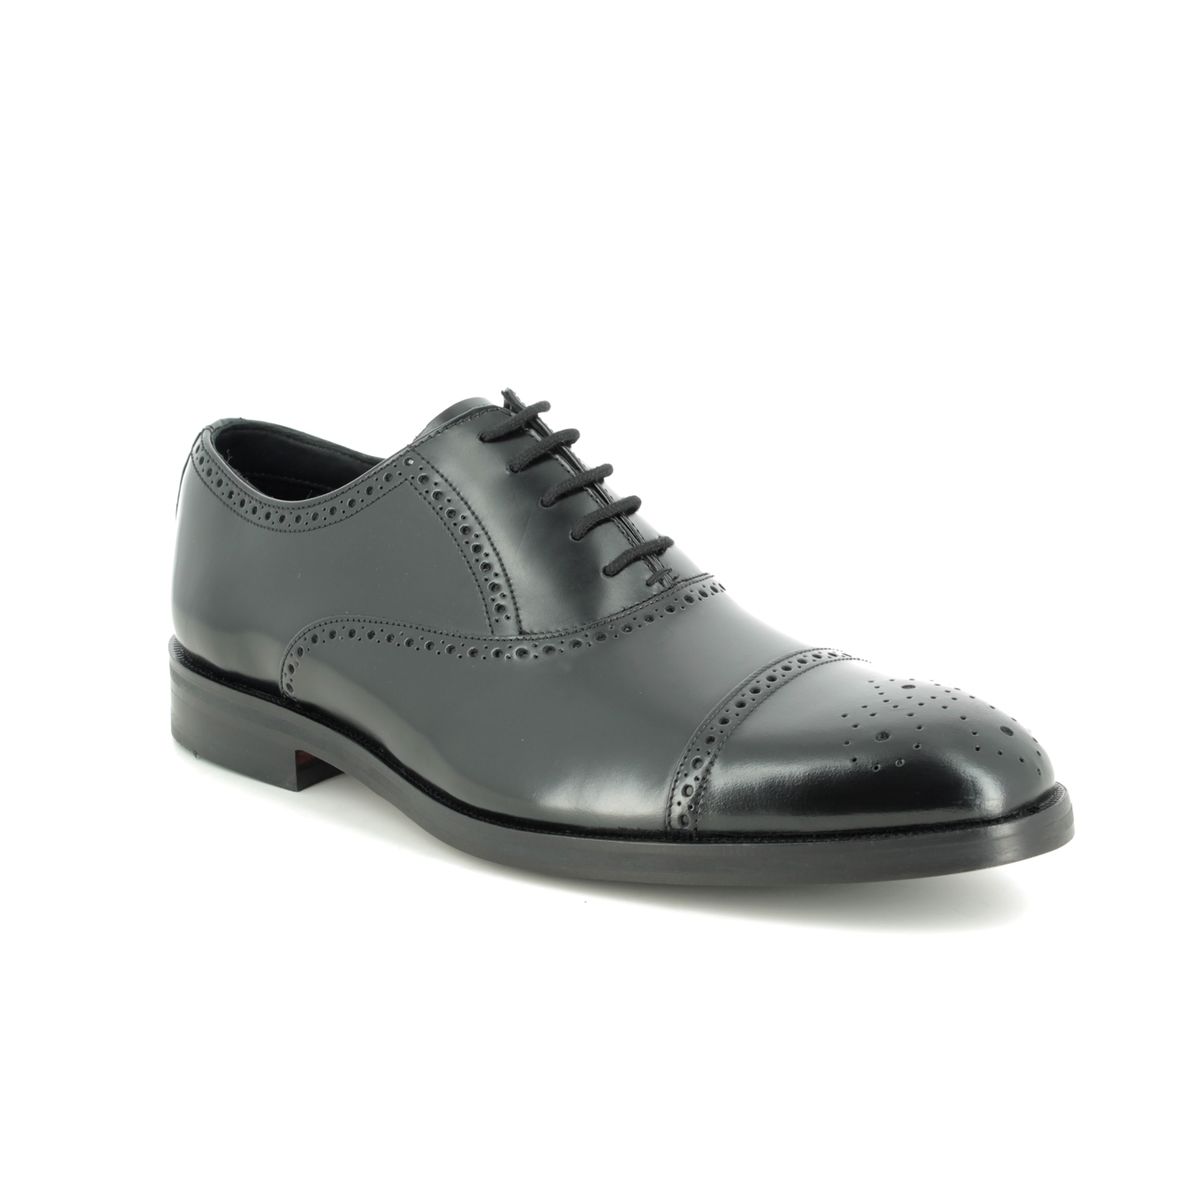 Clarks Oliver Limit Black Leather Mens Brogues 436467G In Size 10 In Plain Black Leather G Width Fitting